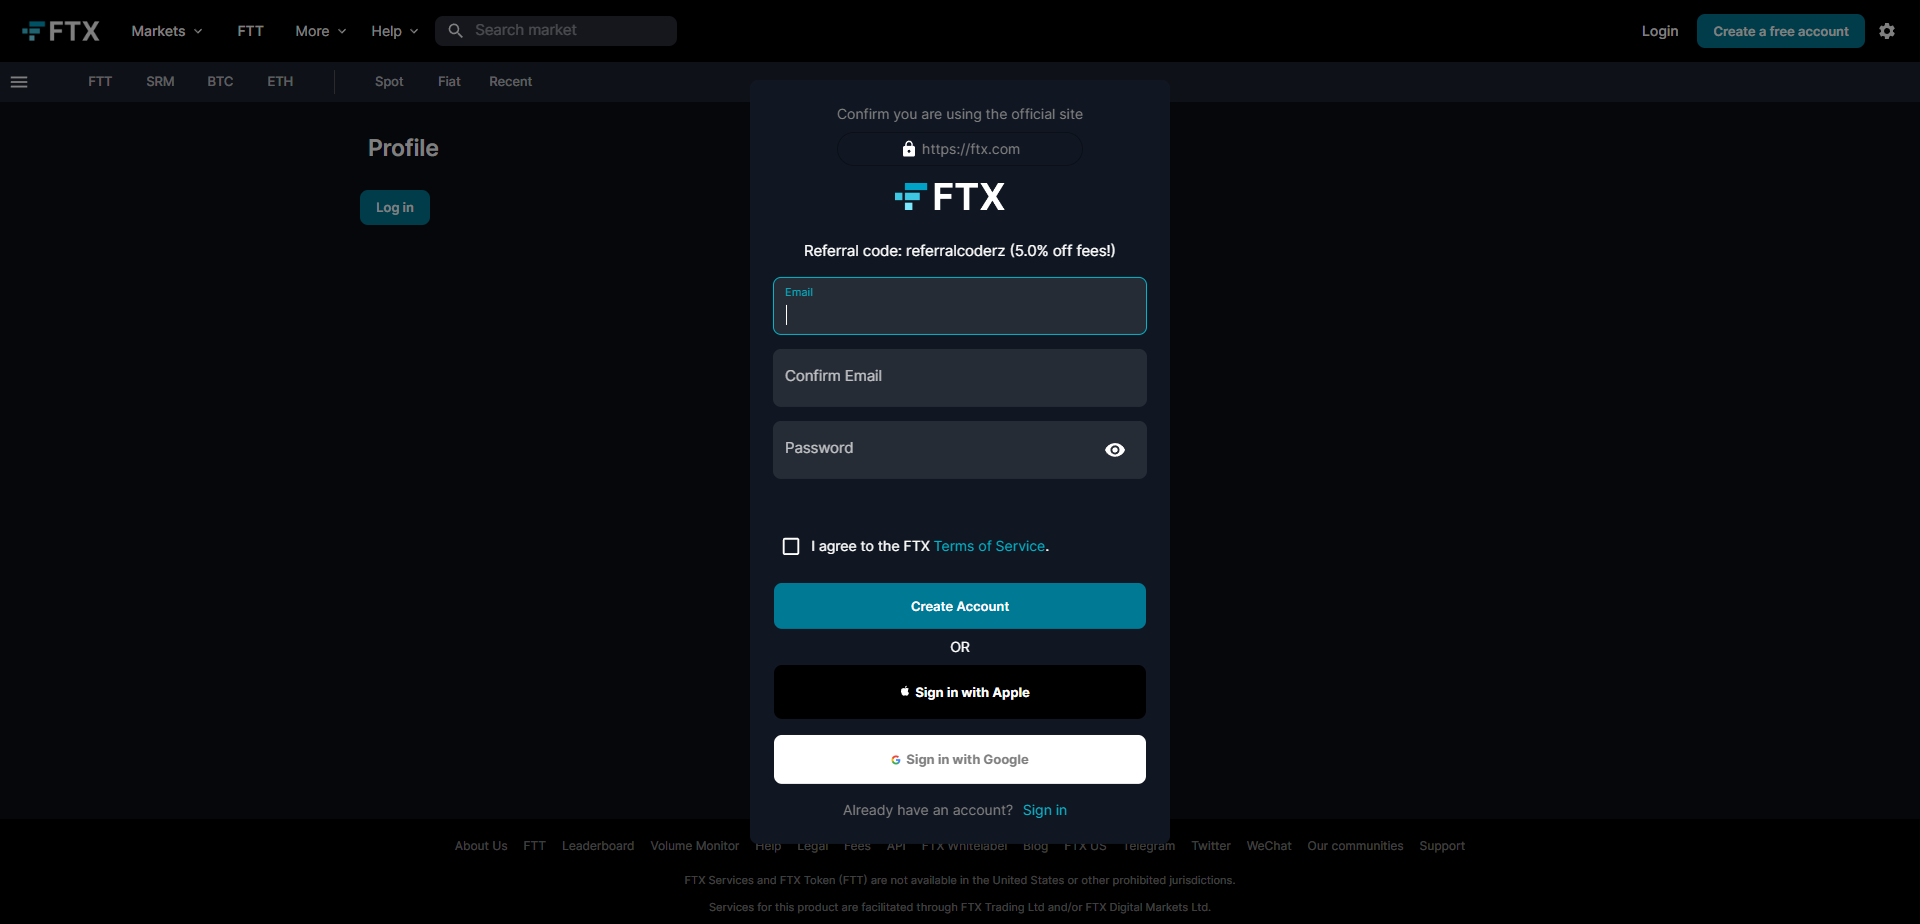 Landing Page for FTX